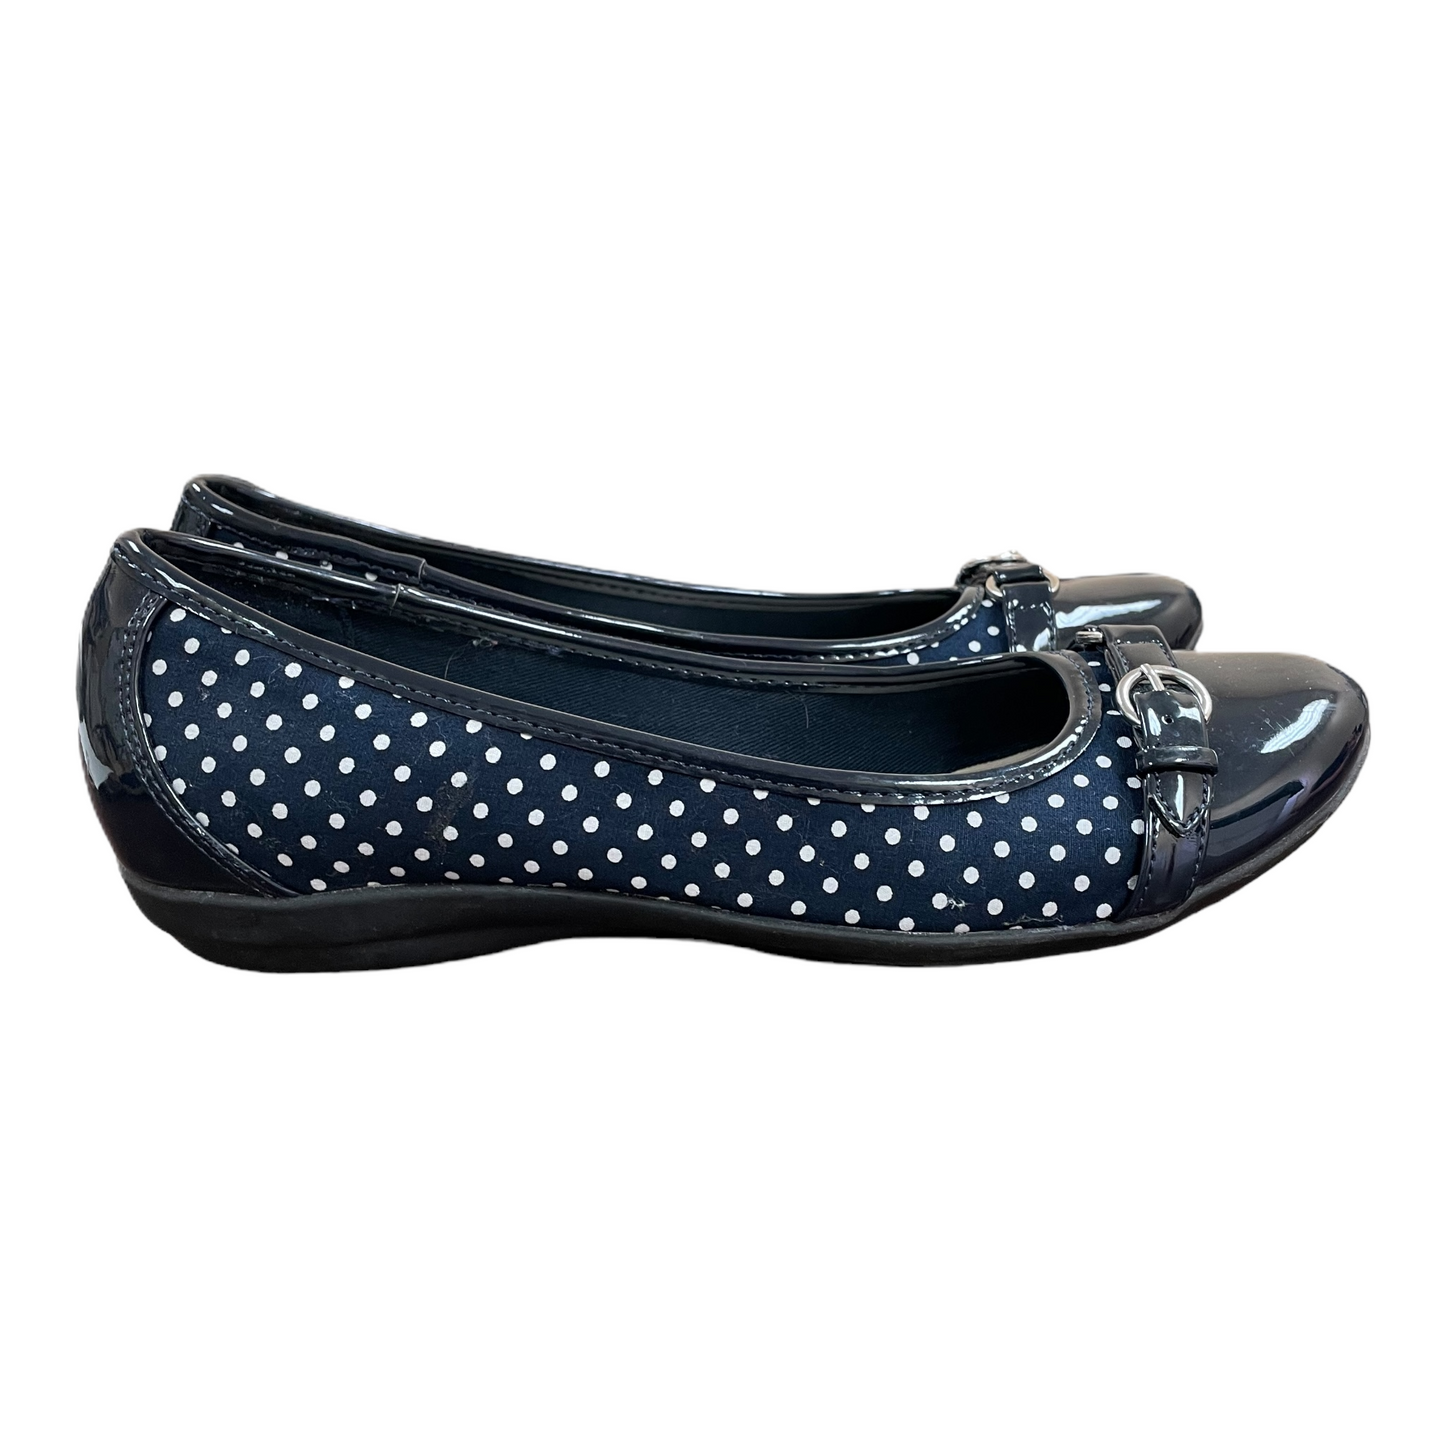 Navy Shoes Flats By Croft And Barrow, Size: 7